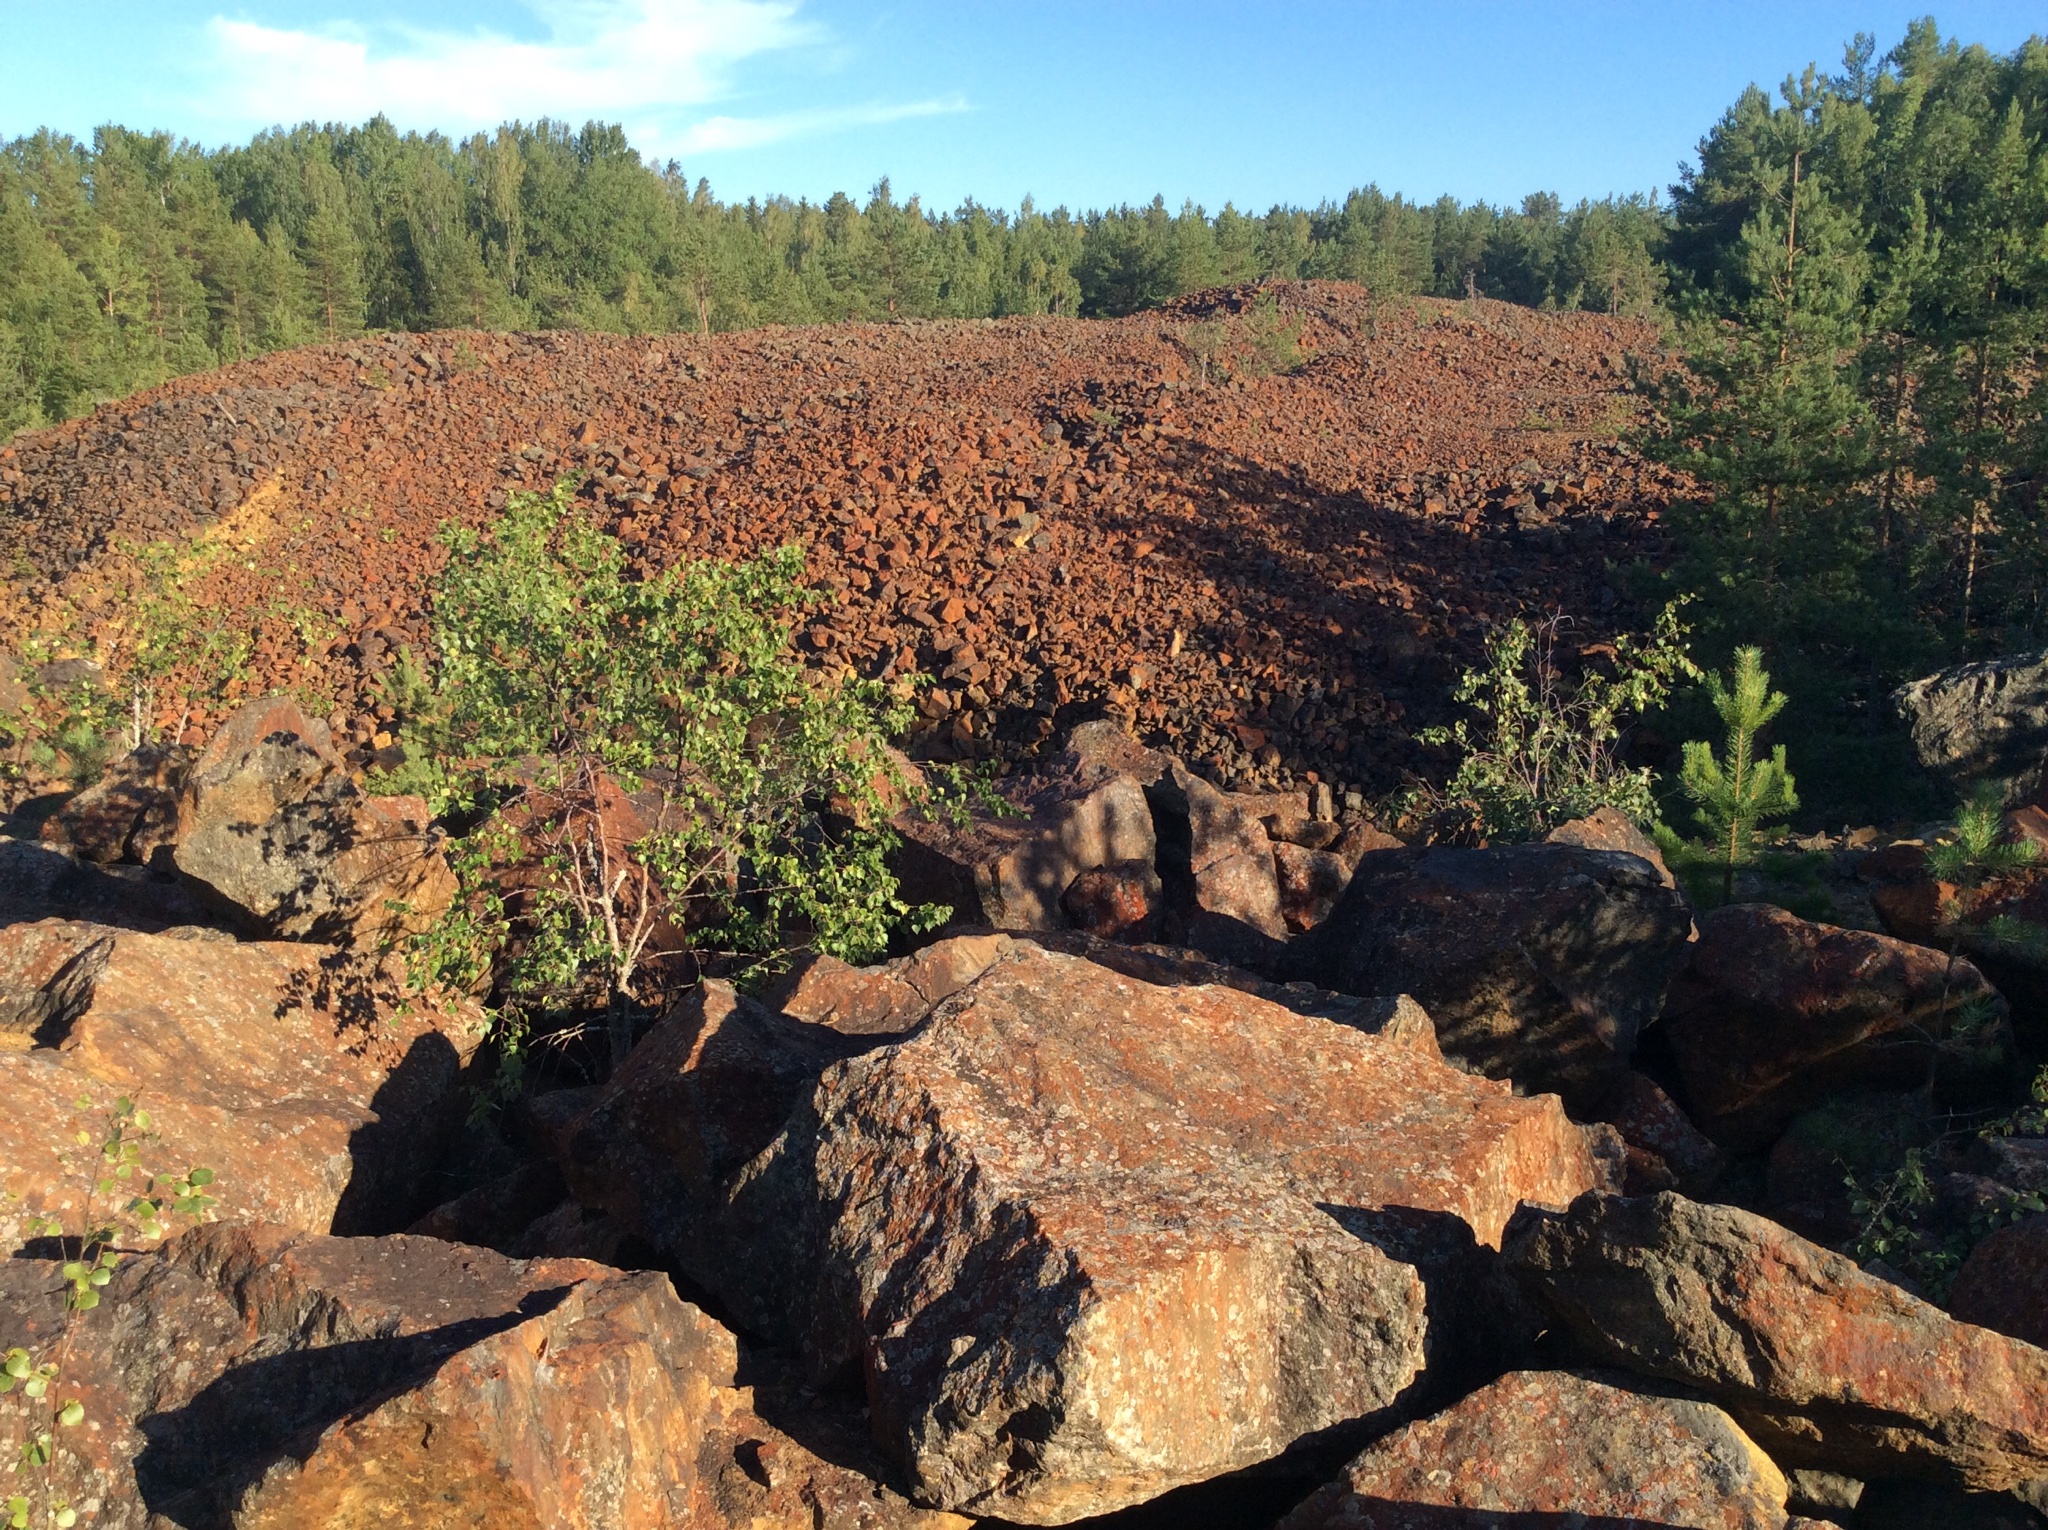 Extensive dumps and mine workings on the property